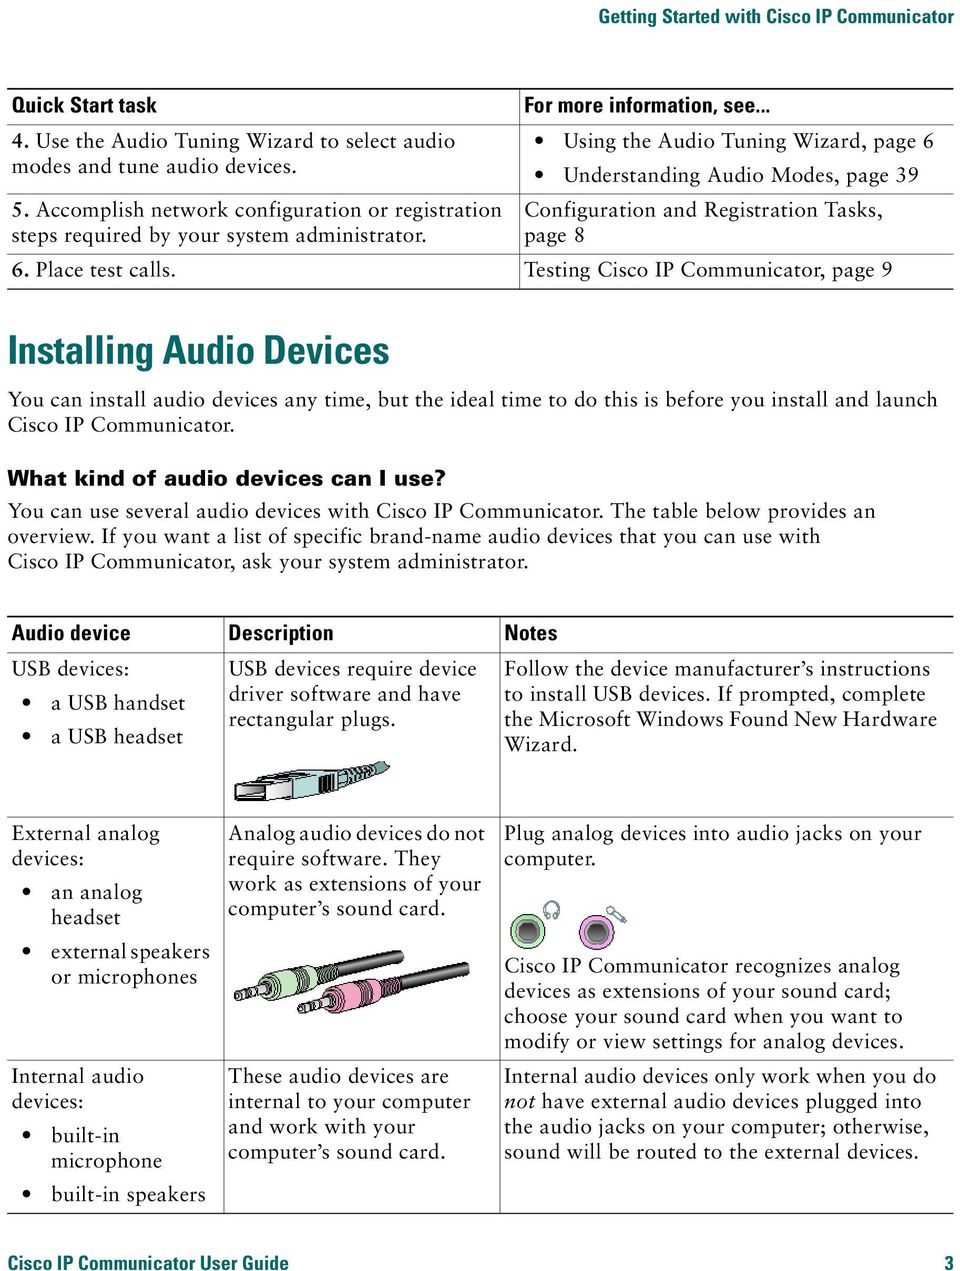 .. Using the Audio Tuning Wizard, page 6 Understanding Audio Modes, page 39 Configuration and Registration Tasks, page 8 6. Place test calls.